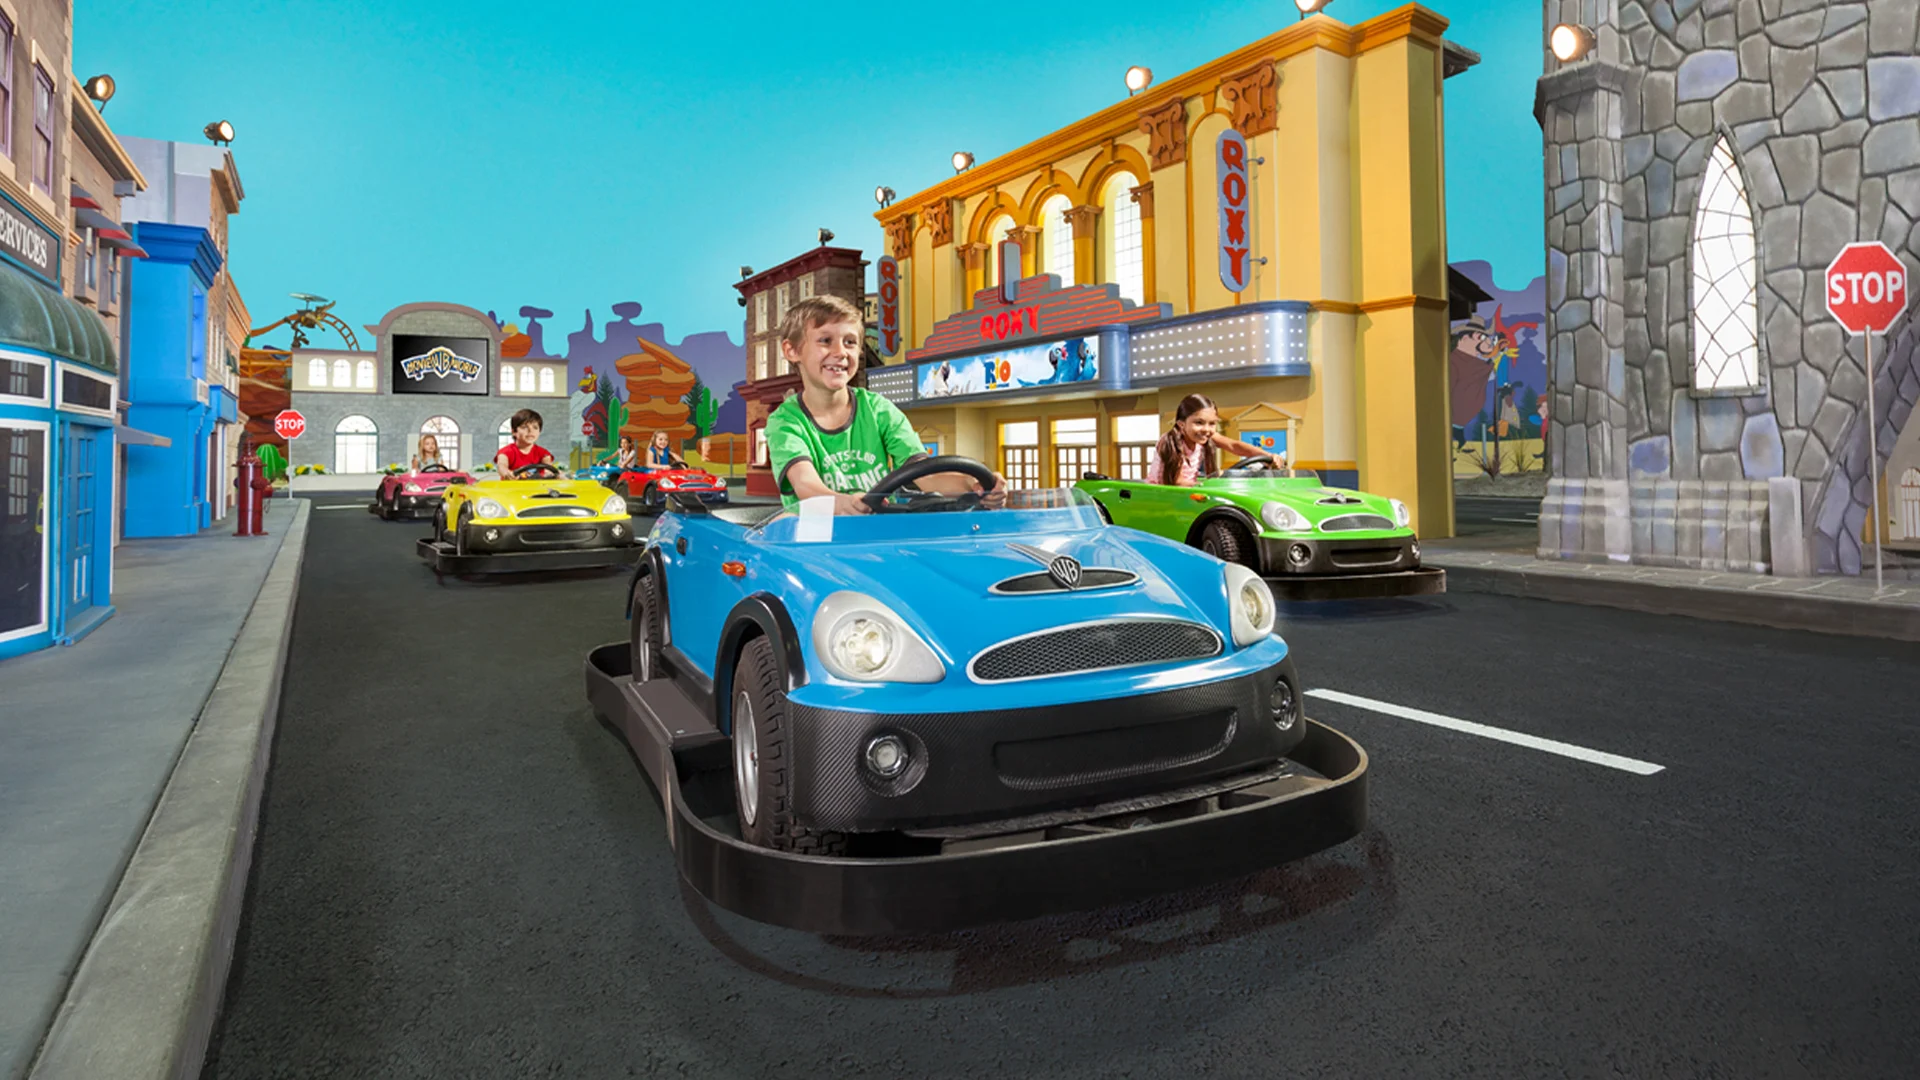 Children enjoying the Junior Driving School kids attraction at Warner Bros. Movie World, driving miniature cars around a scaled-down version of the theme park